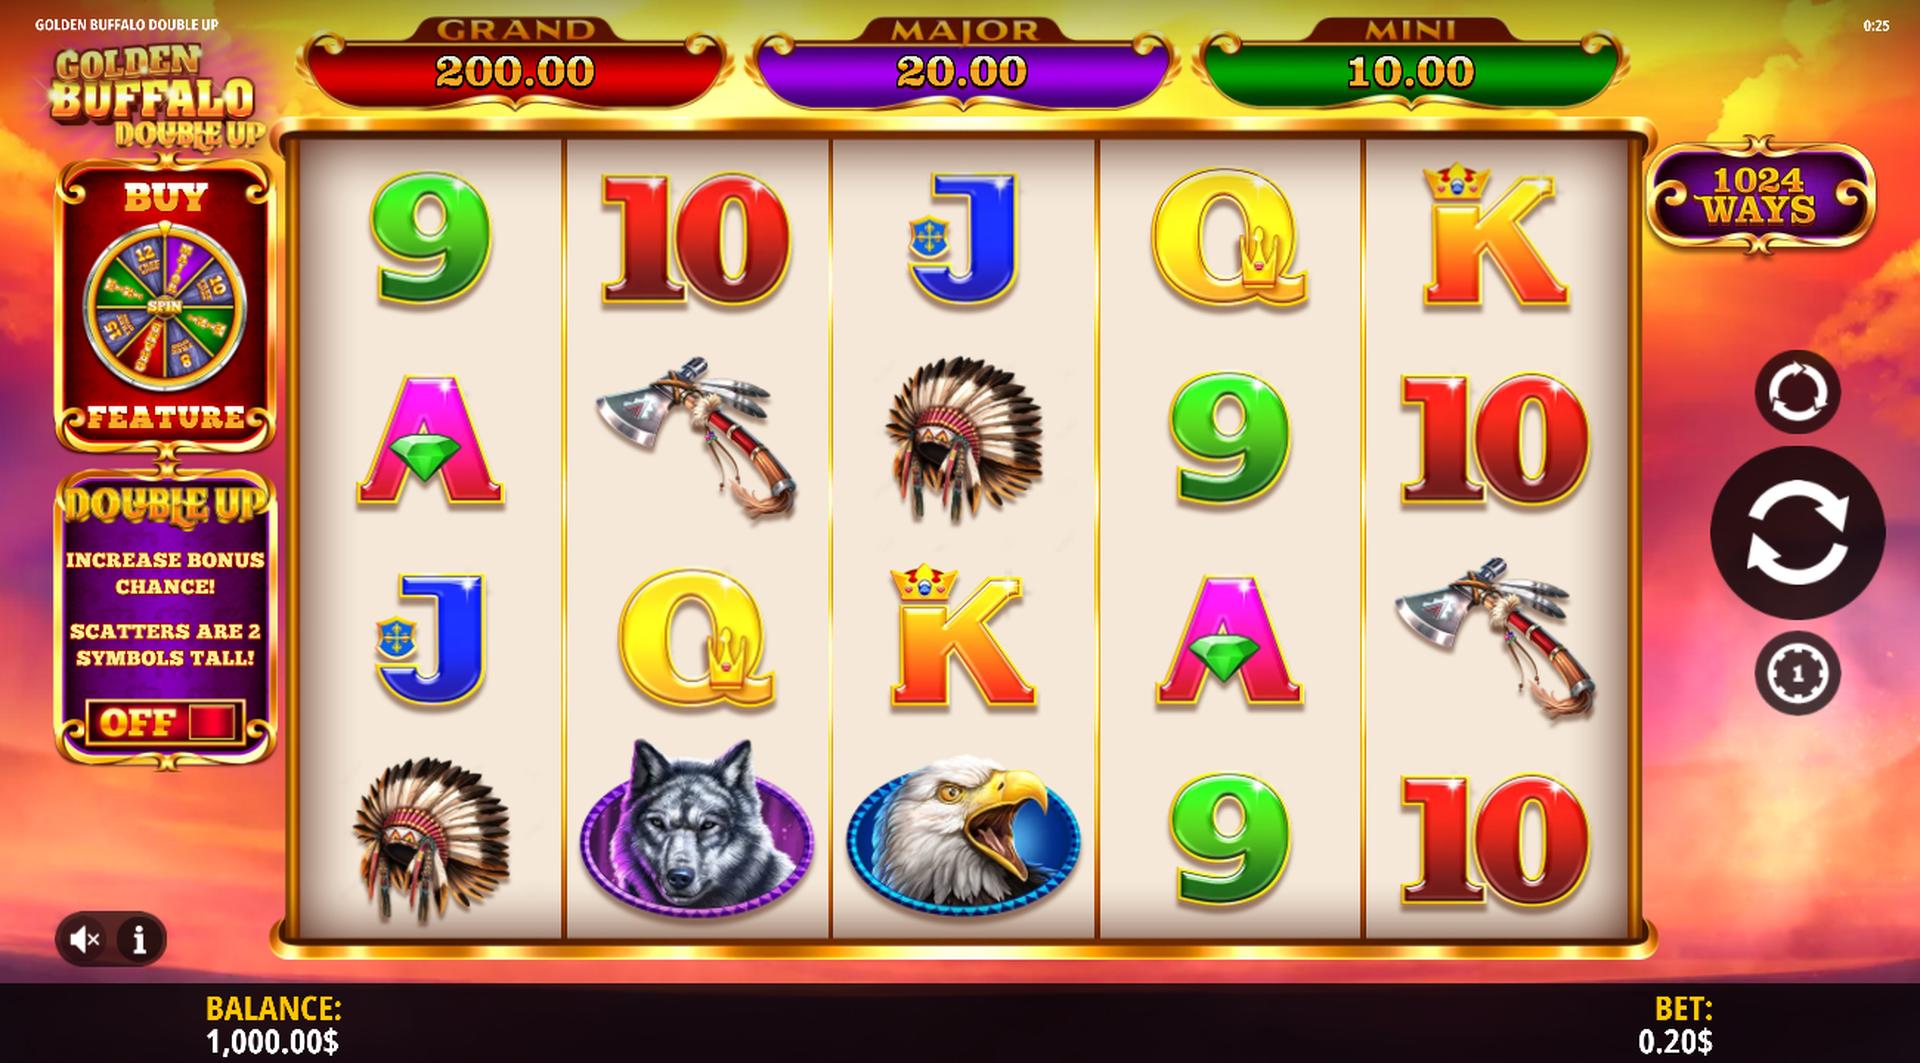 Golden Buffalo Double Up Slot - Paytable & Paylines